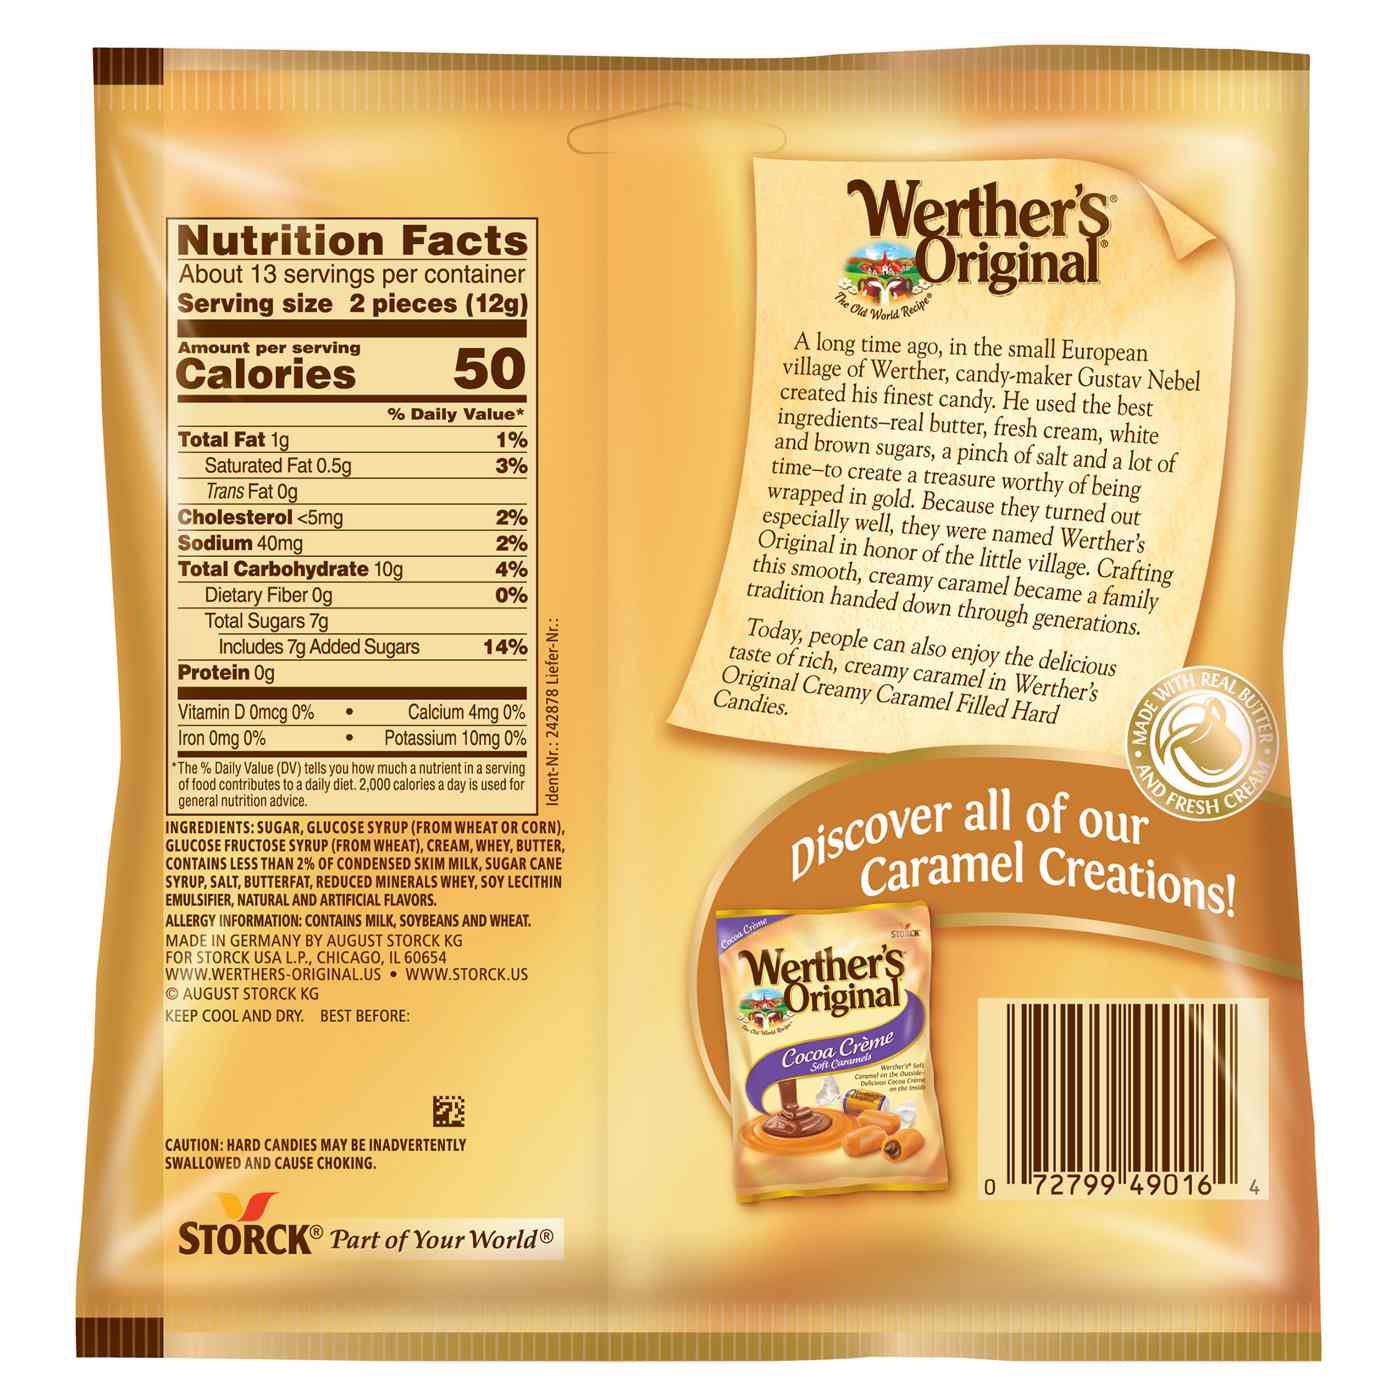 Werther's Original Creamy Caramel Filled Candy; image 3 of 6